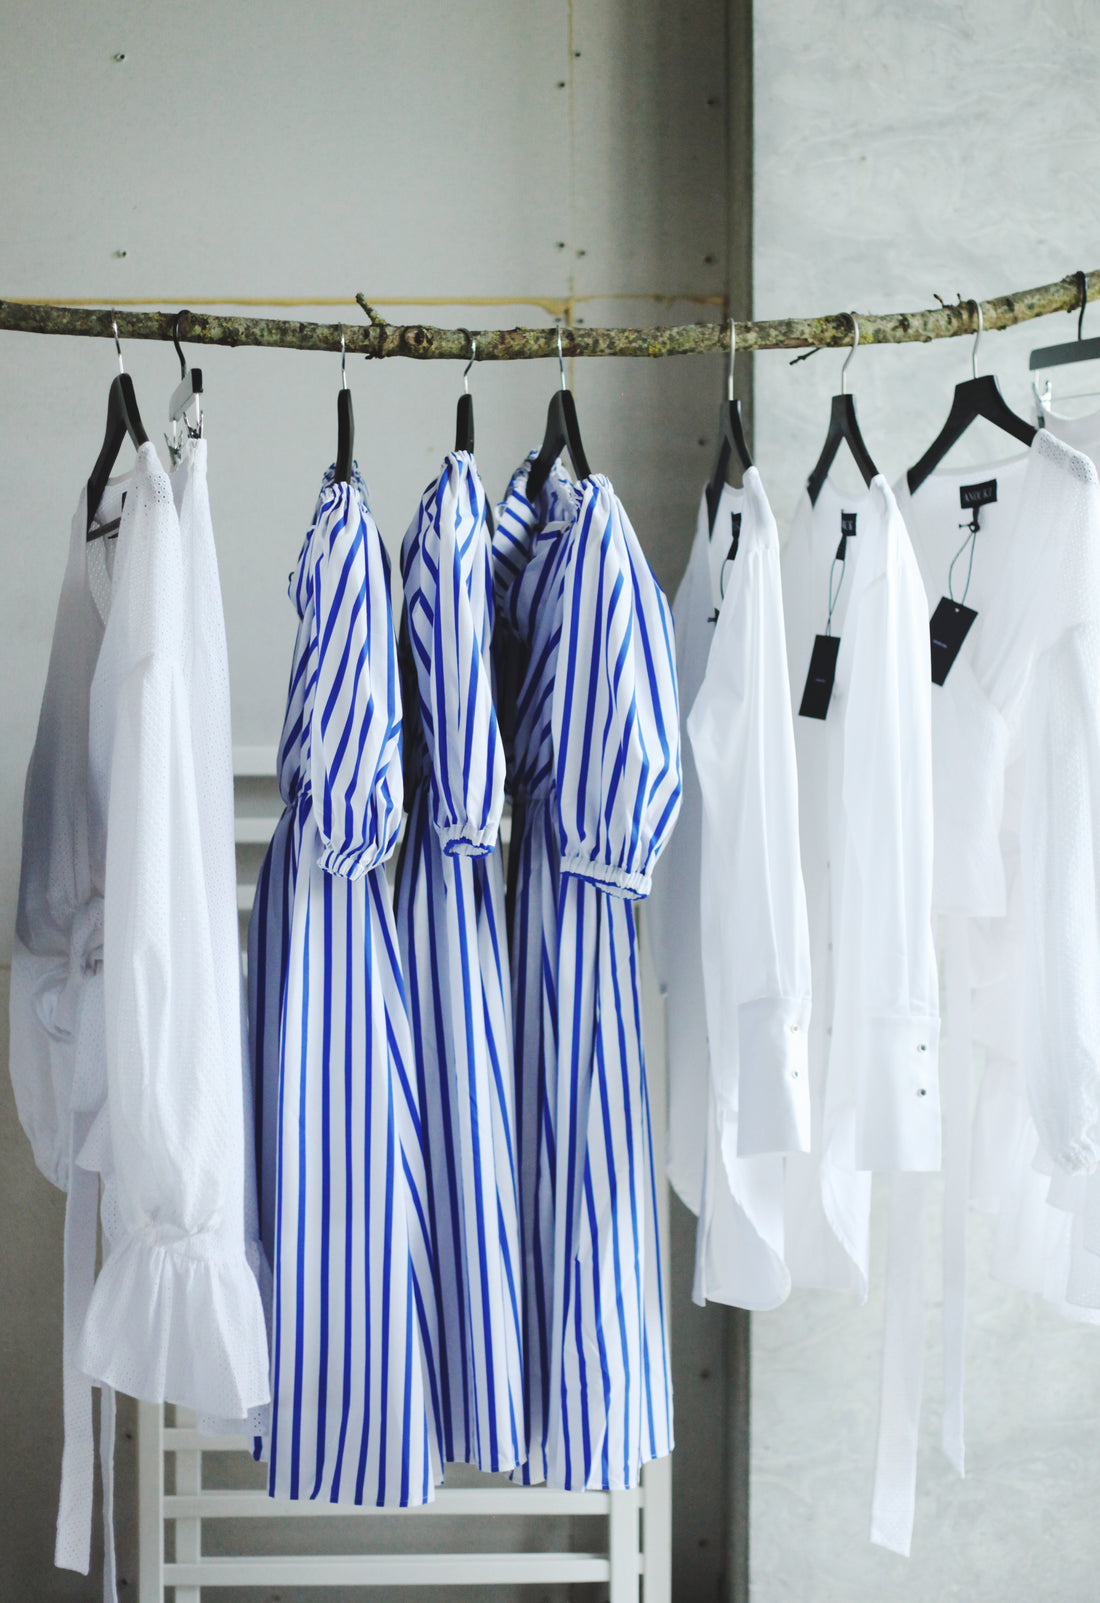 Striped dresses and white shirts hanging on a wooden branch